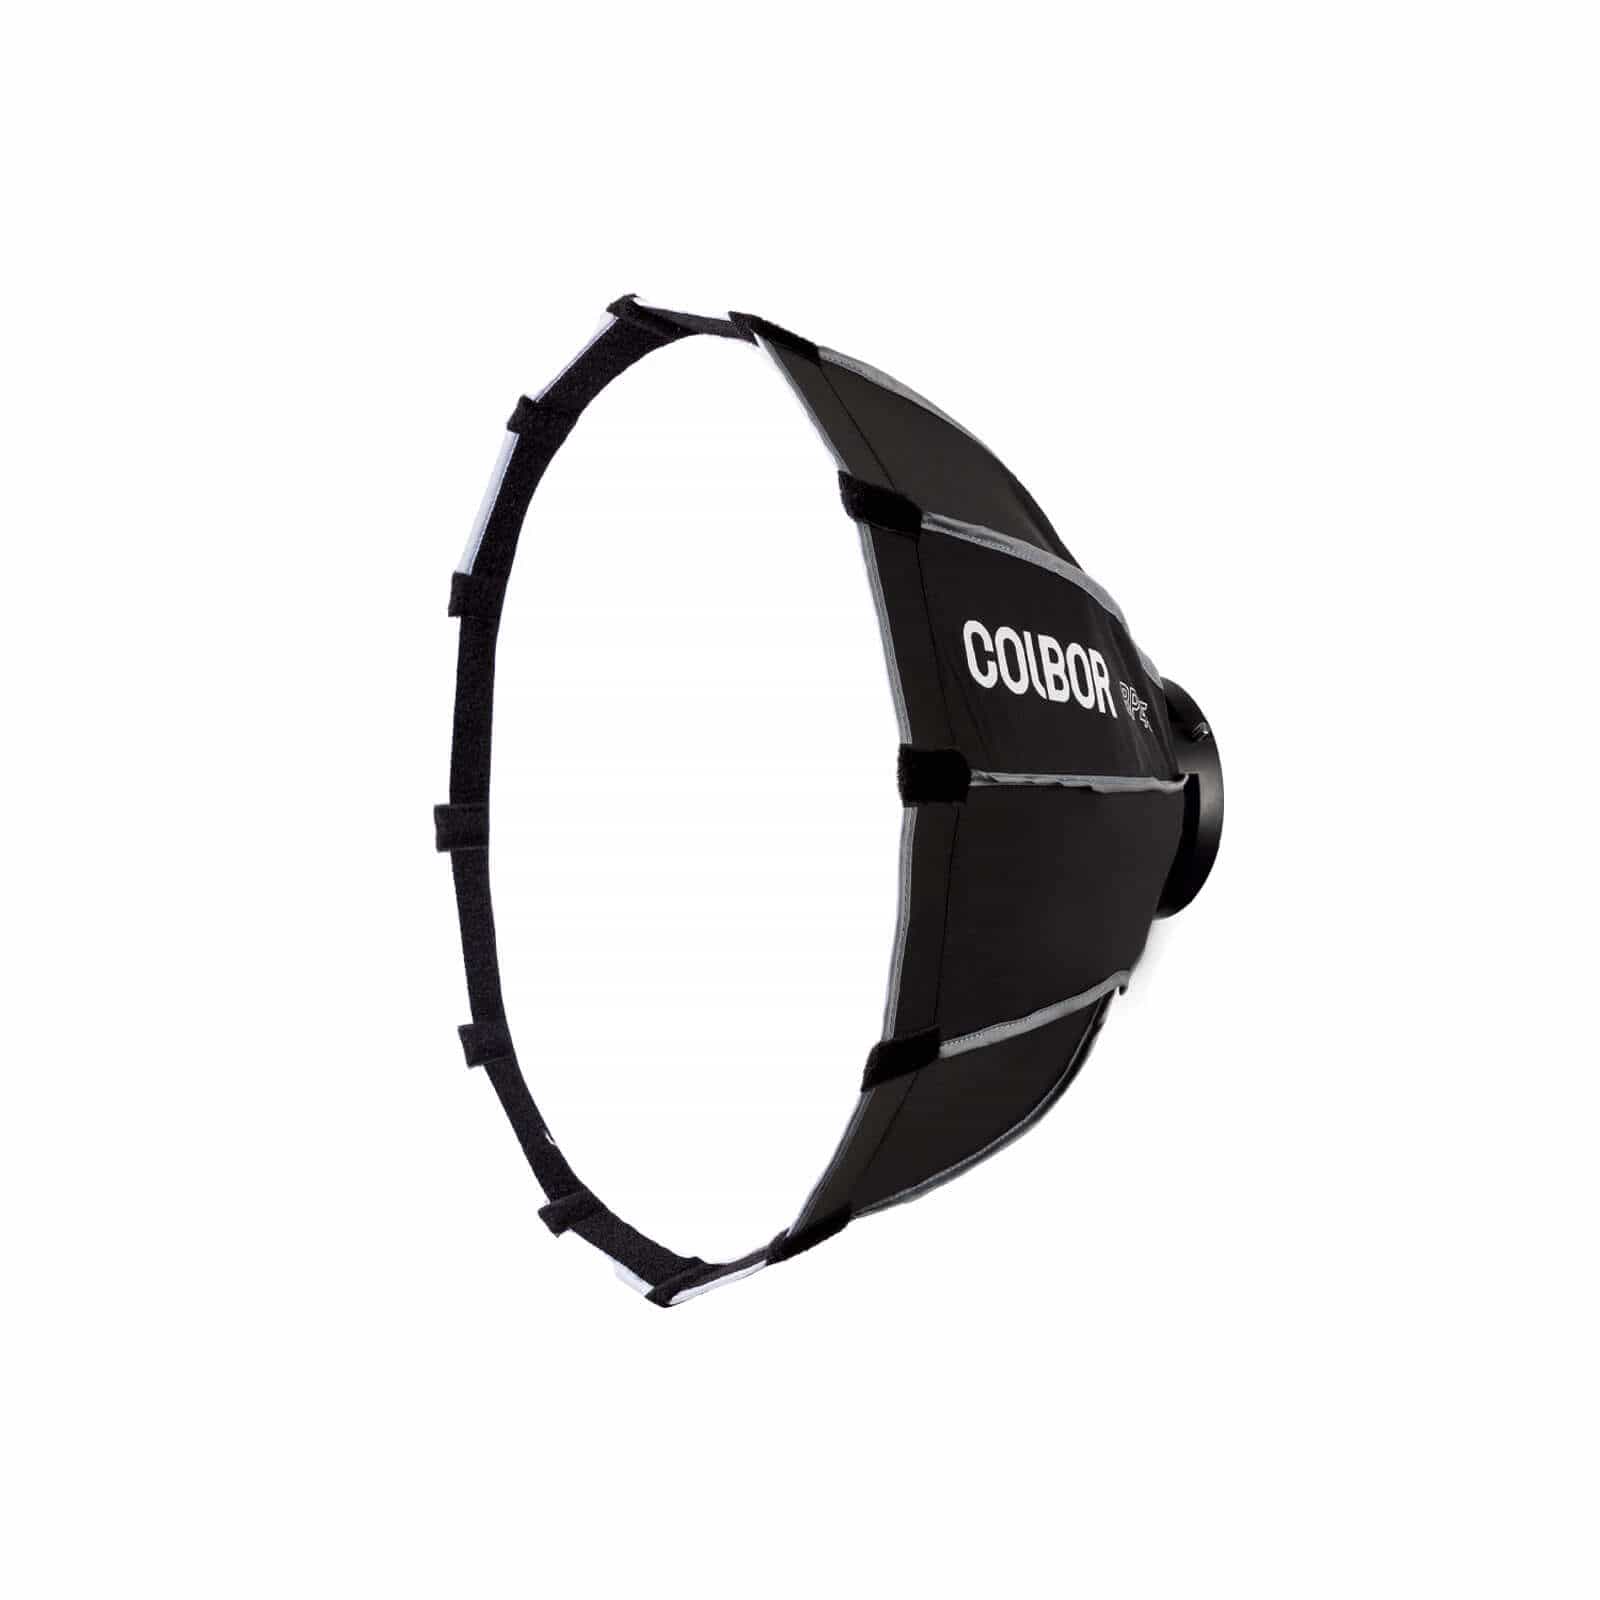 COLBOR BP45 is a parabolic softbox that has 12 sides.